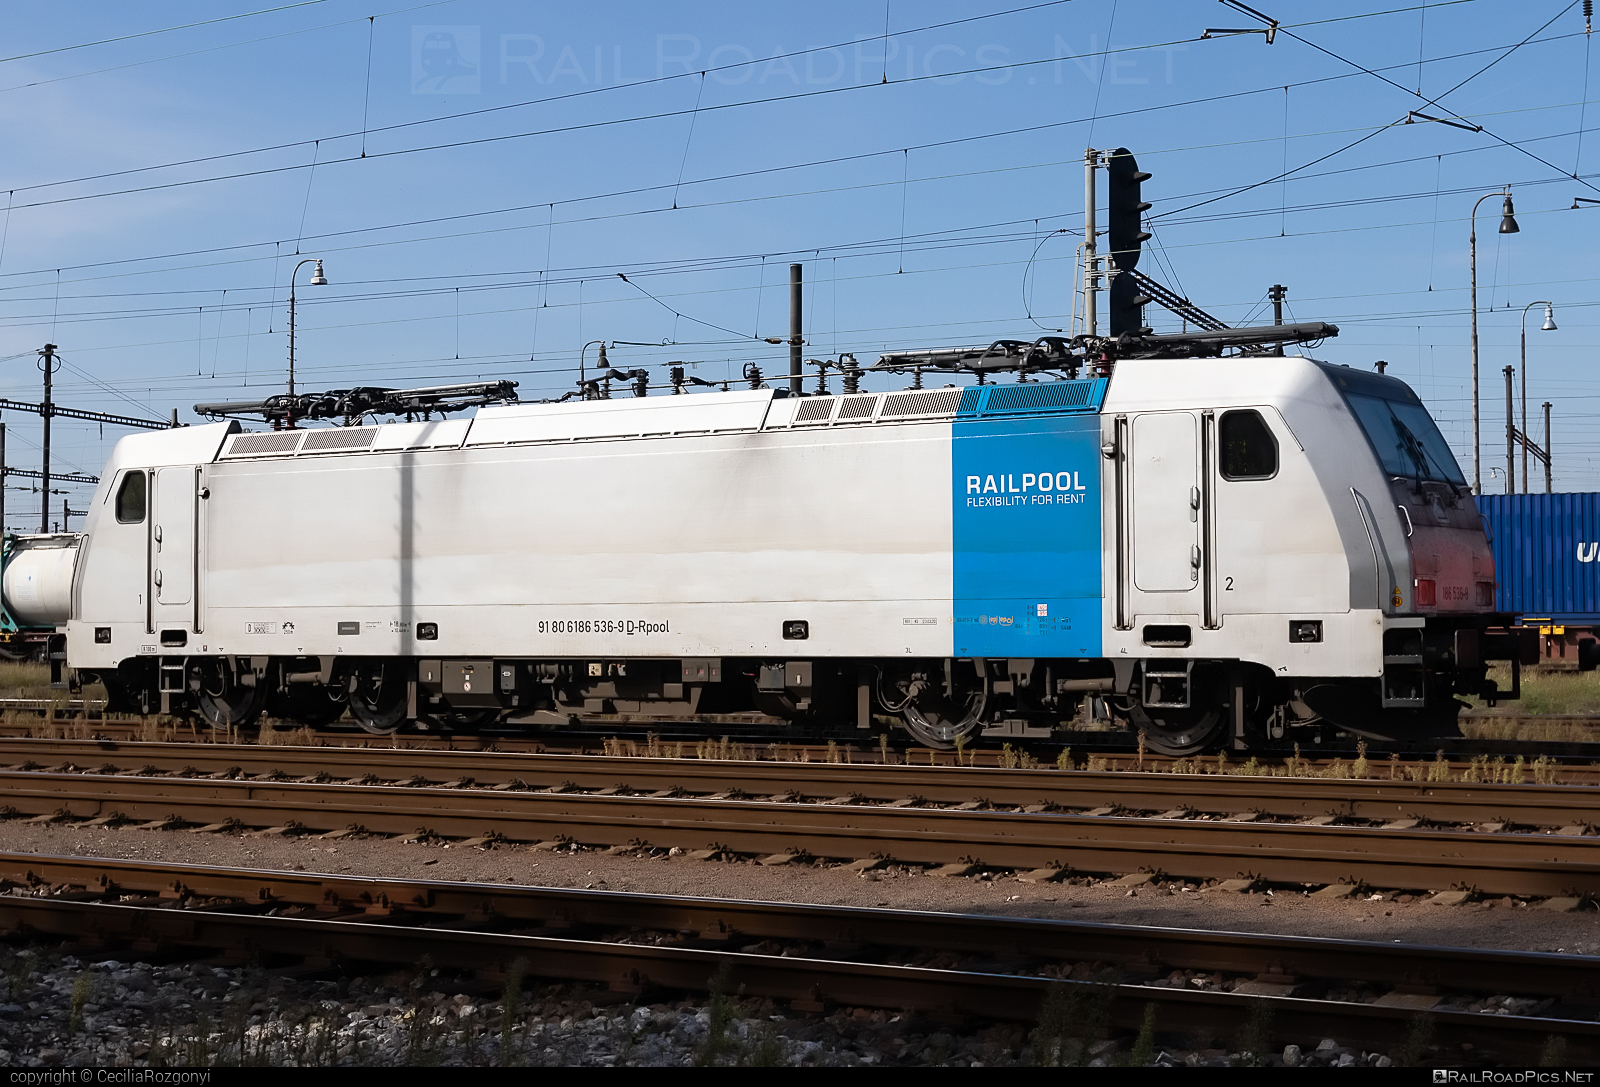 Bombardier TRAXX F140 MS - 186 536-9 operated by Retrack Slovakia s. r. o. #bombardier #bombardiertraxx #railpool #railpoolgmbh #retrack #retrackslovakia #traxx #traxxf140 #traxxf140ms